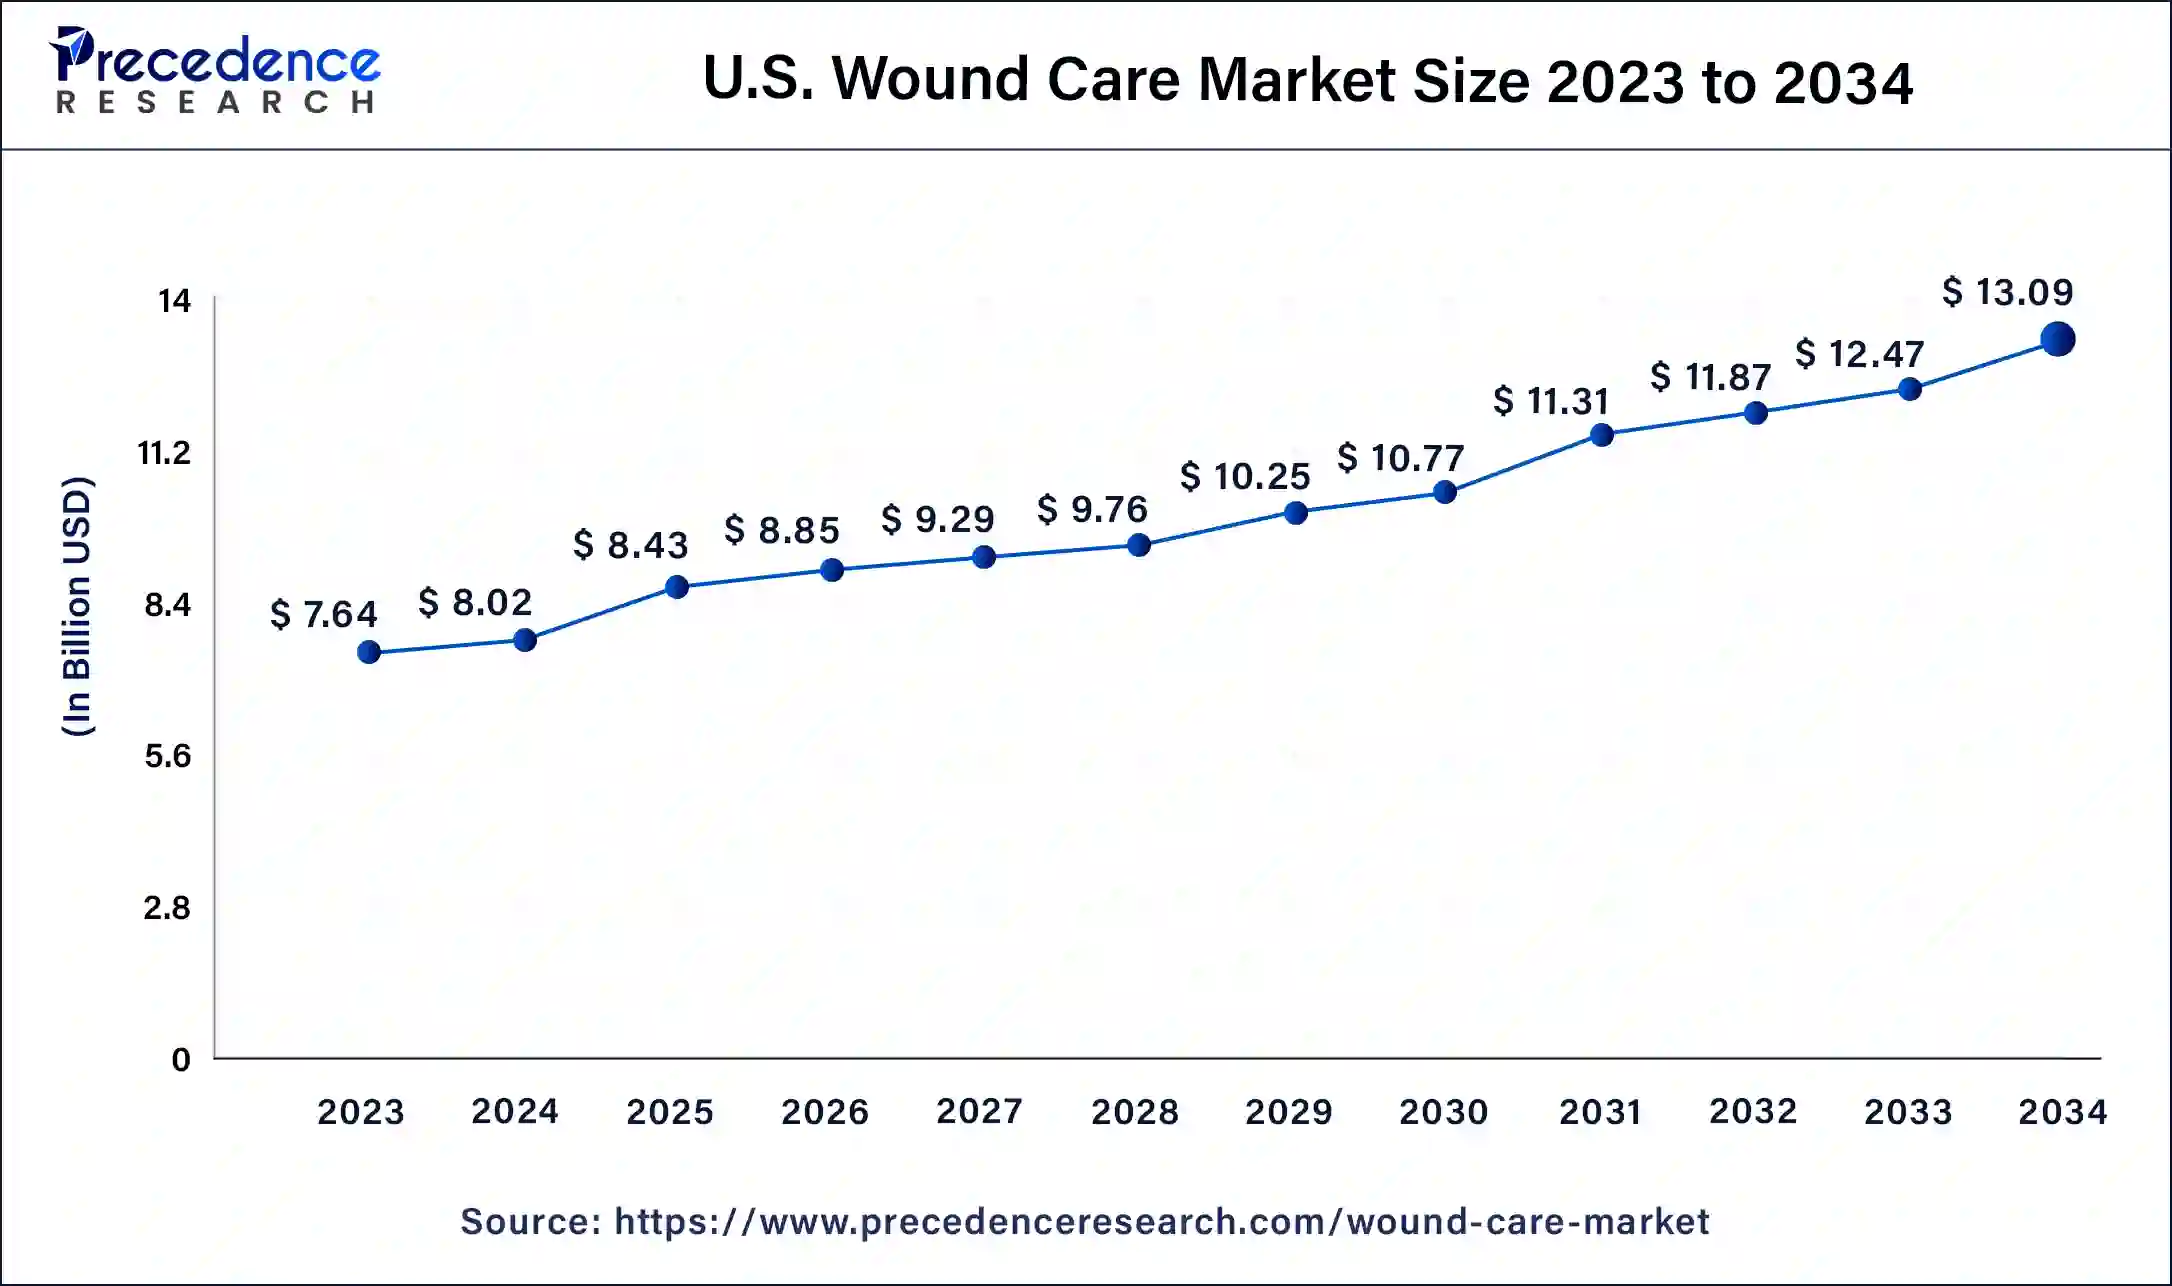 U.S. Wound Care Market Size 2024 to 2034